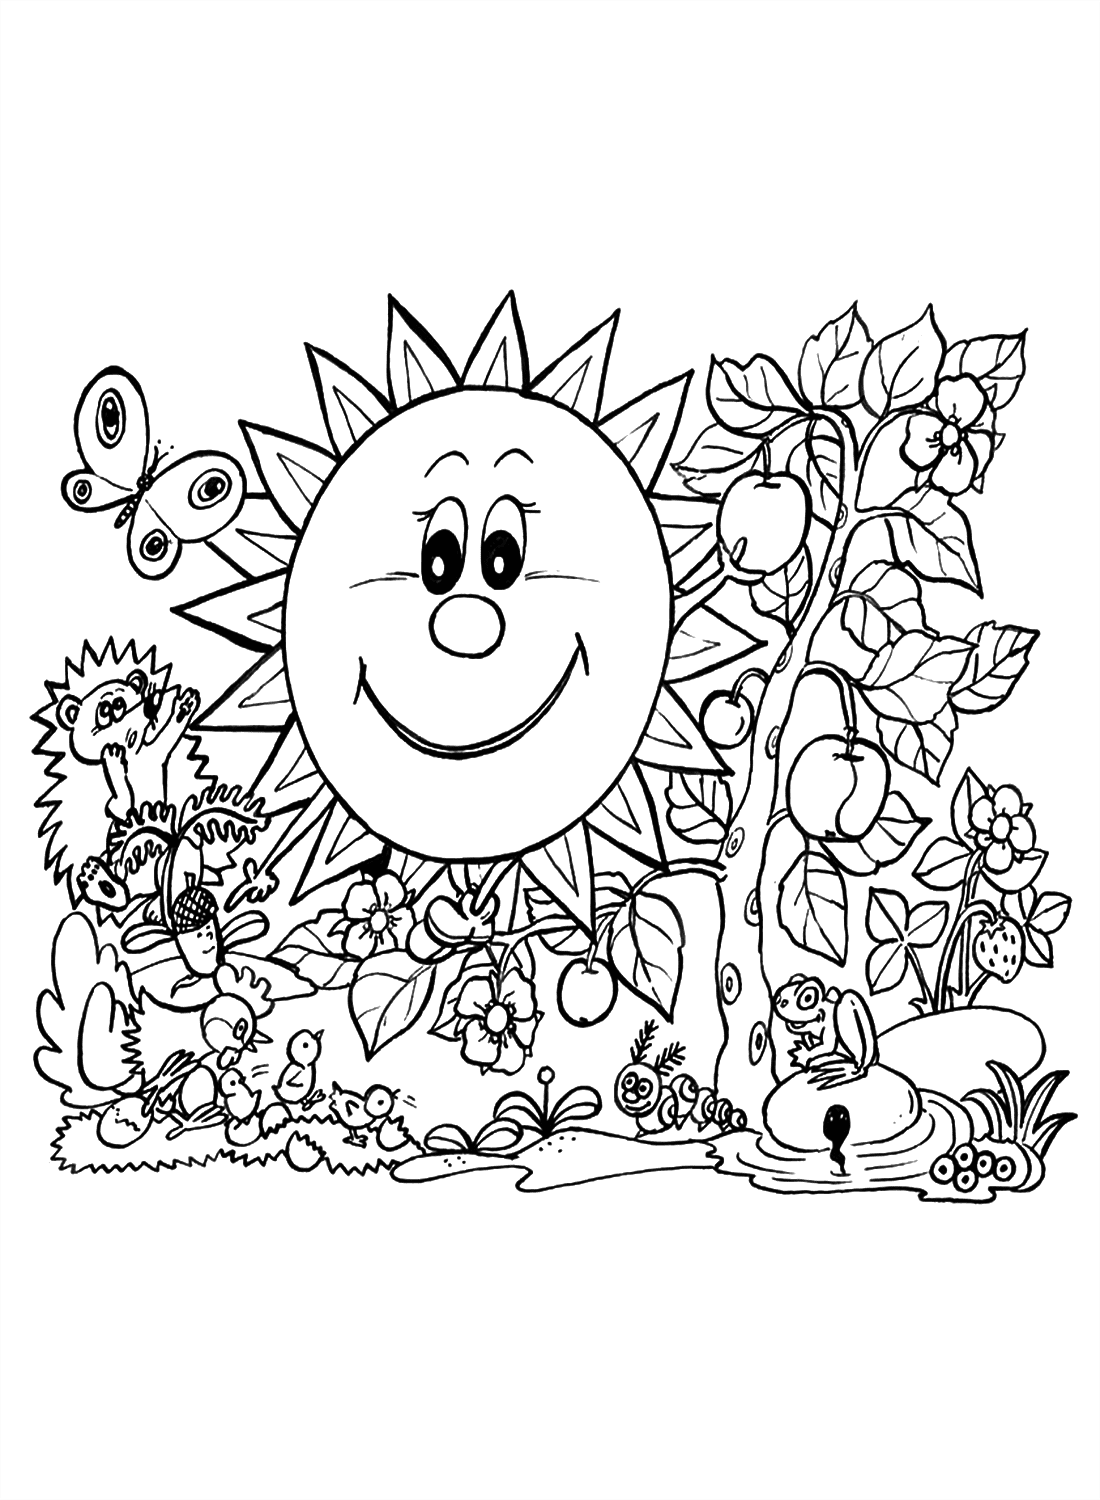 Smiling Sun With Flowers Coloring Page